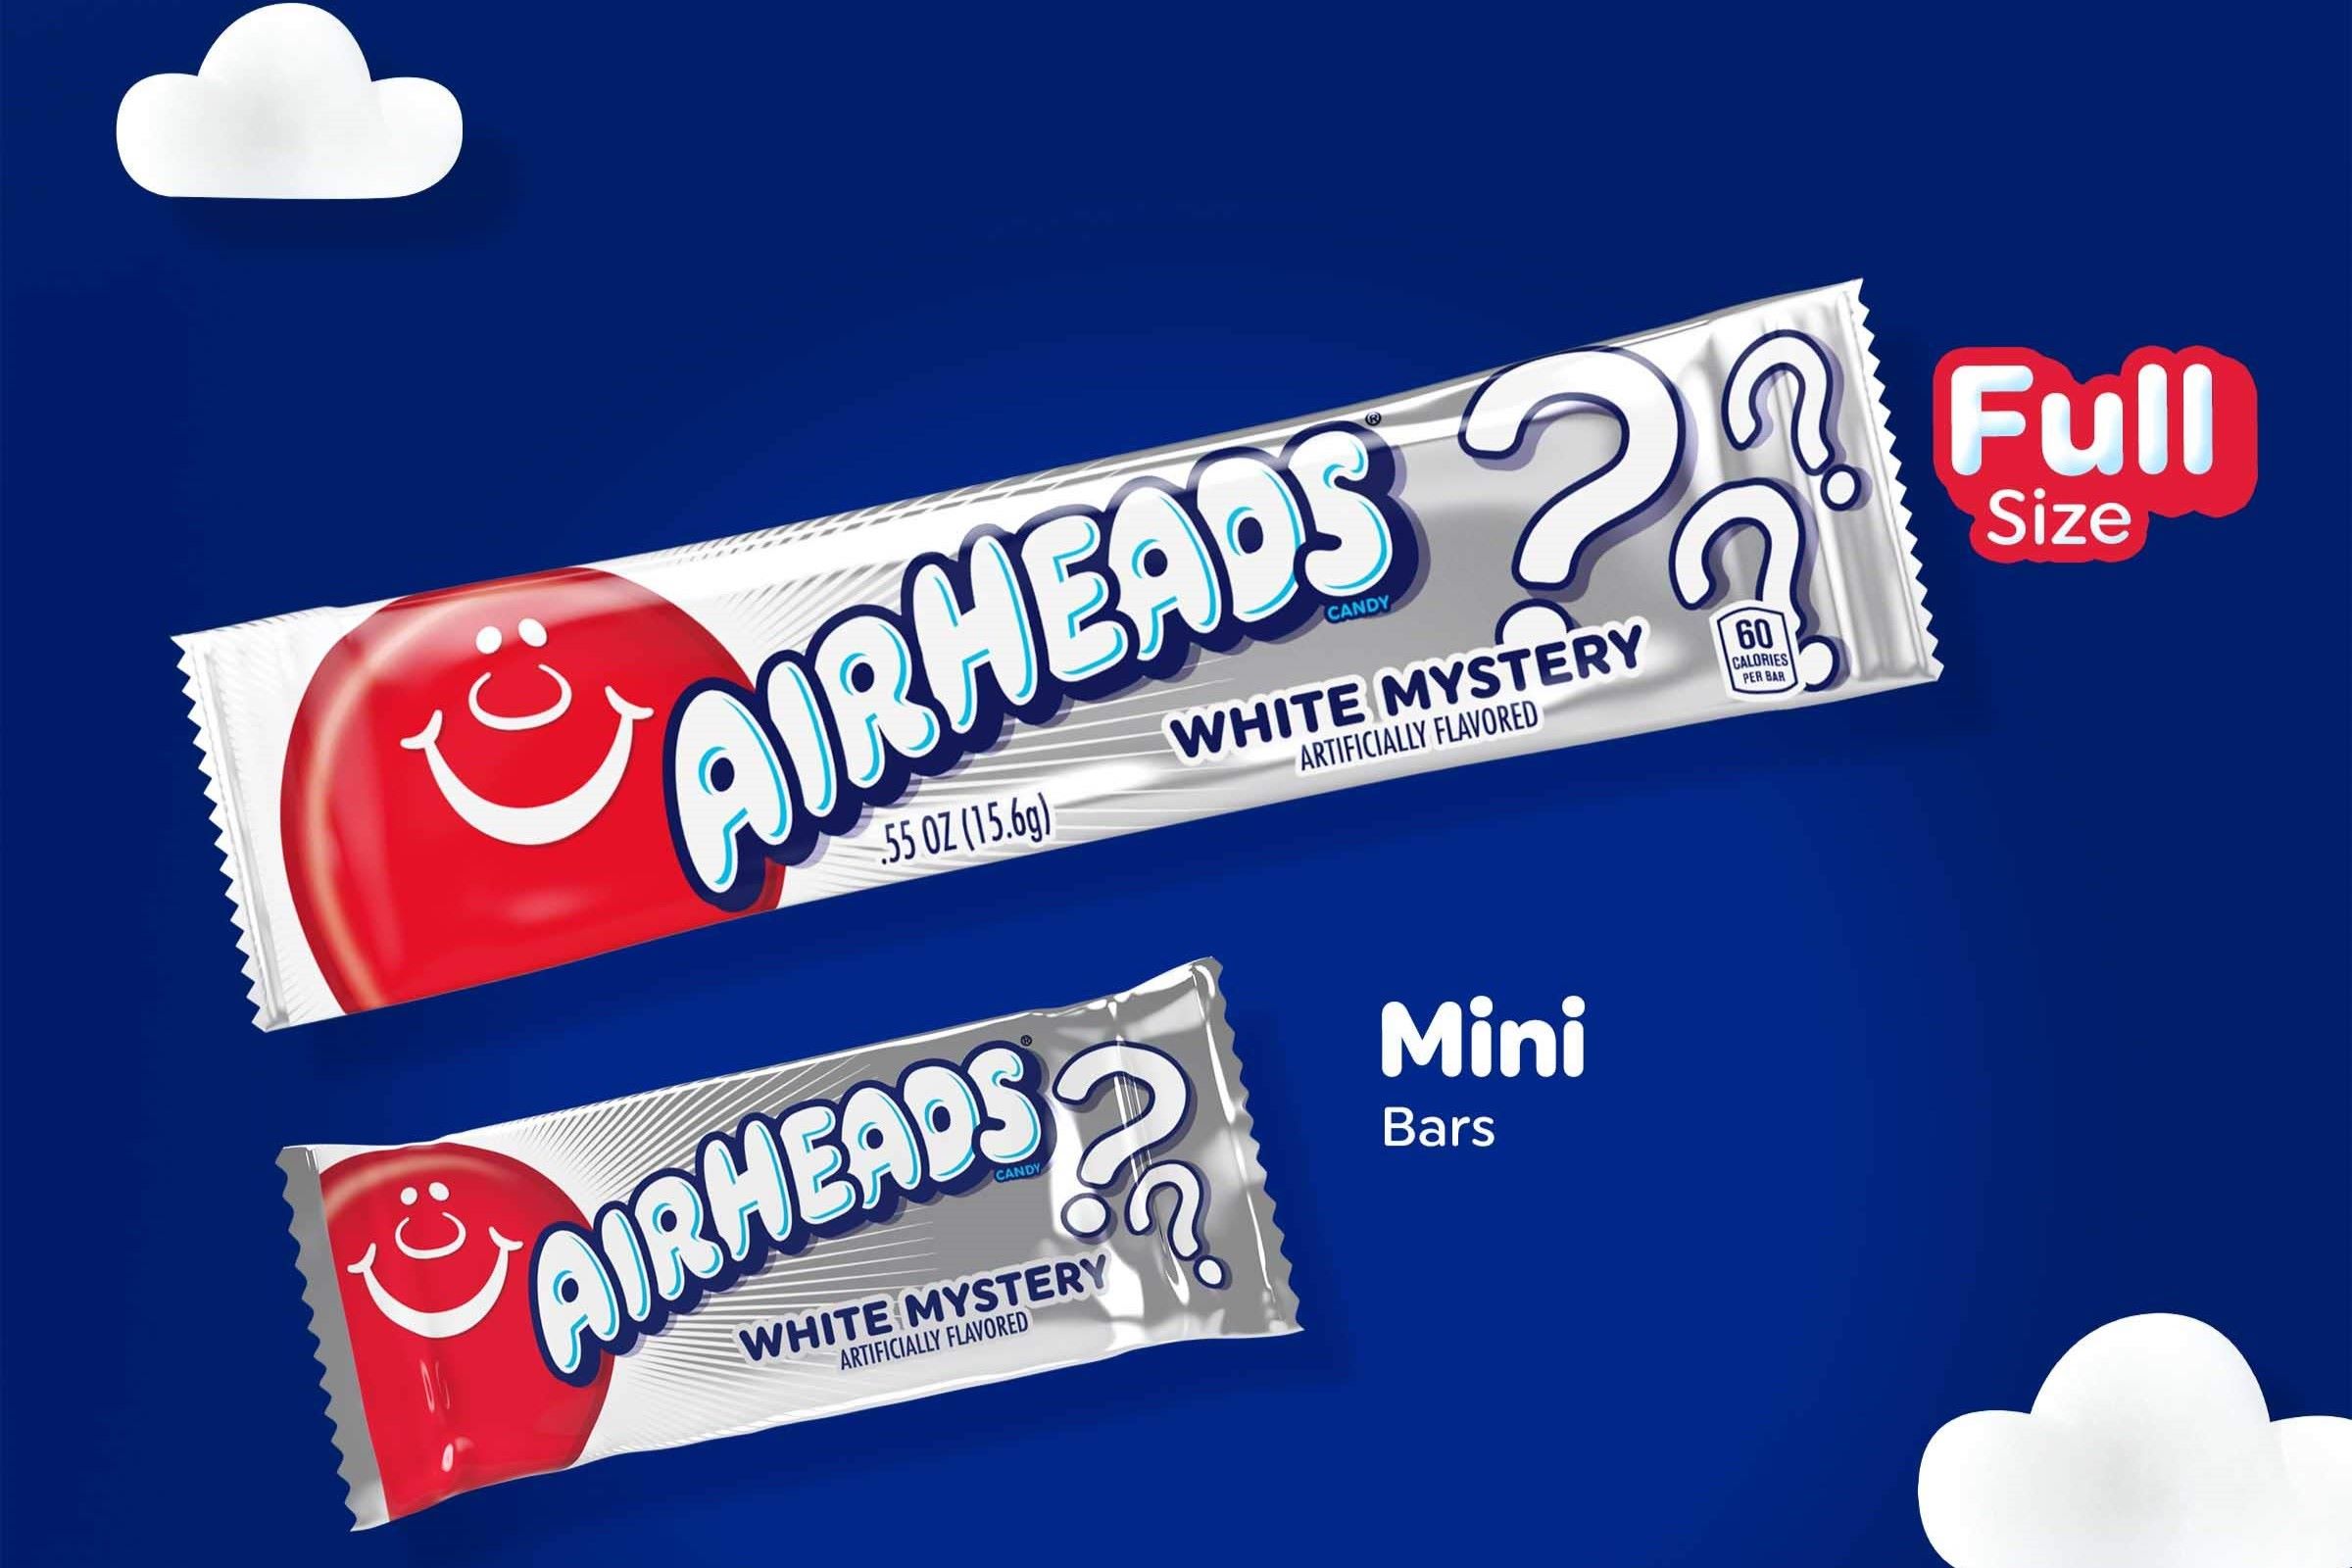 The Untold Secret Of Air Heads’ Mystery Flavor Revealed!